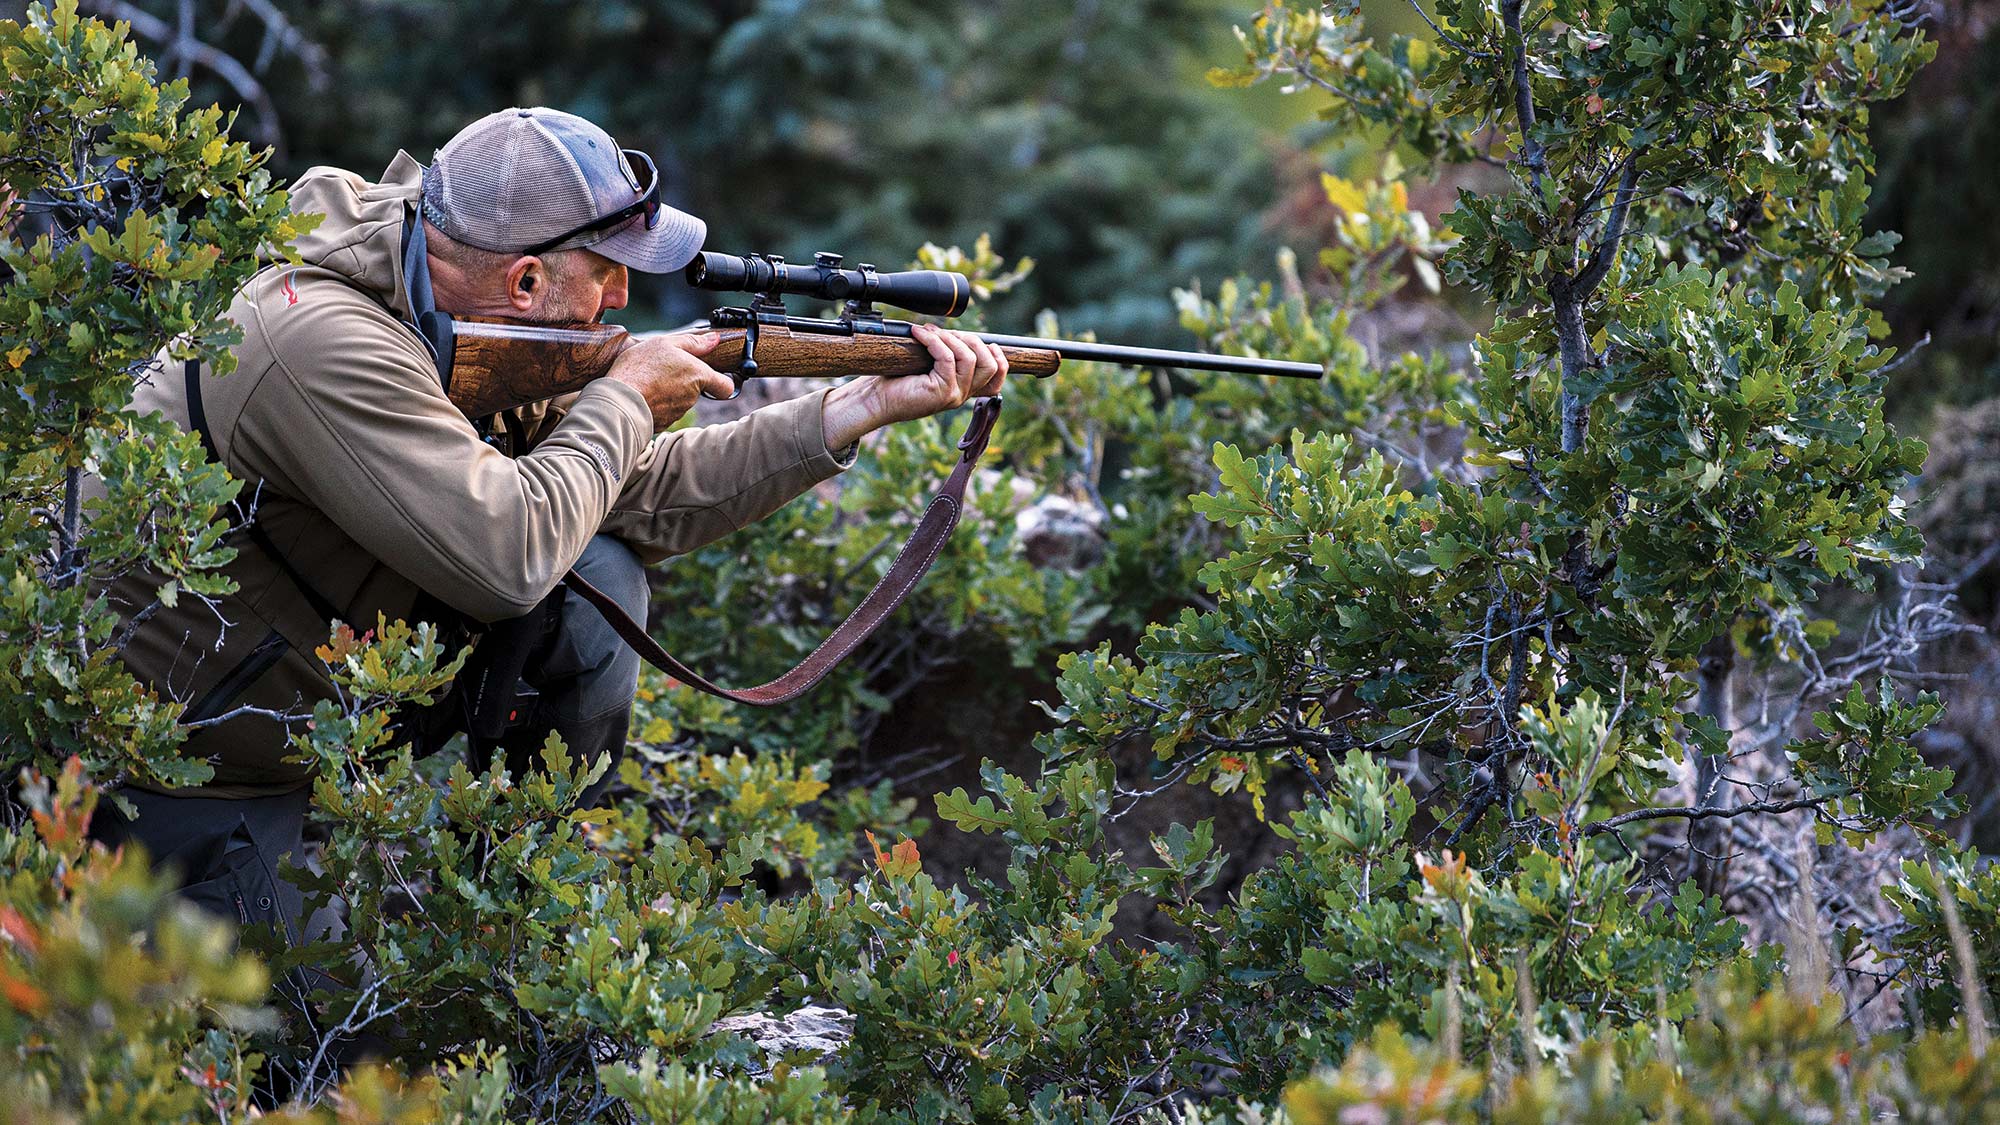 Hunter peers through riflescope and crouches in low brush.